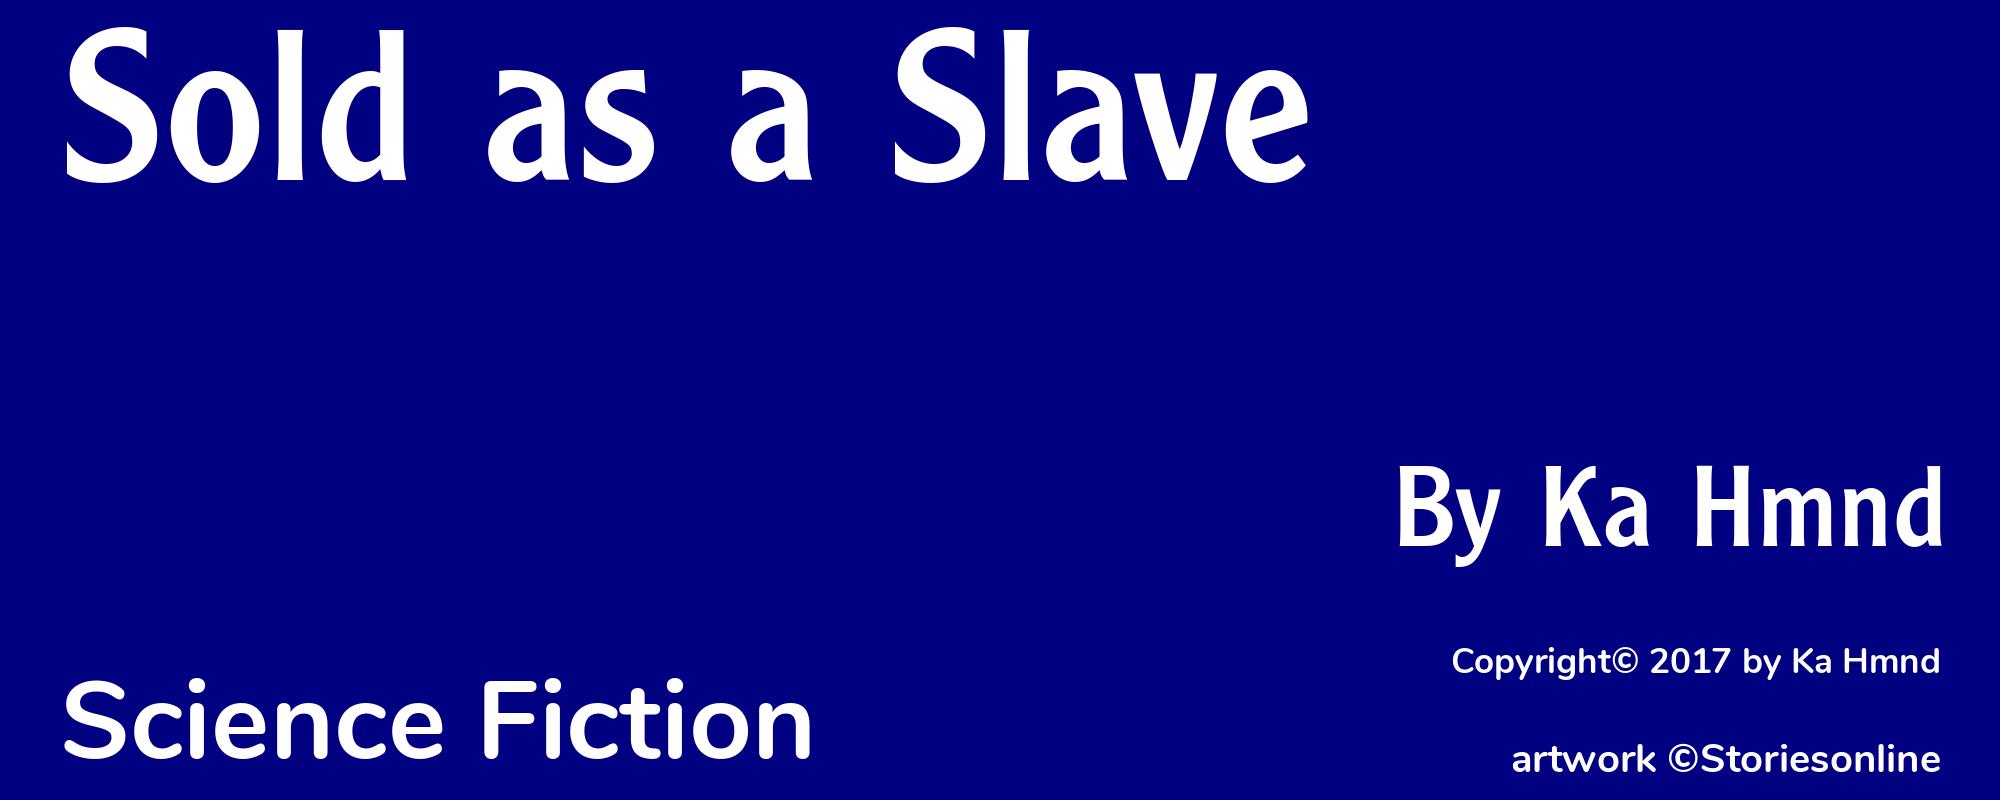 Sold as a Slave - Cover